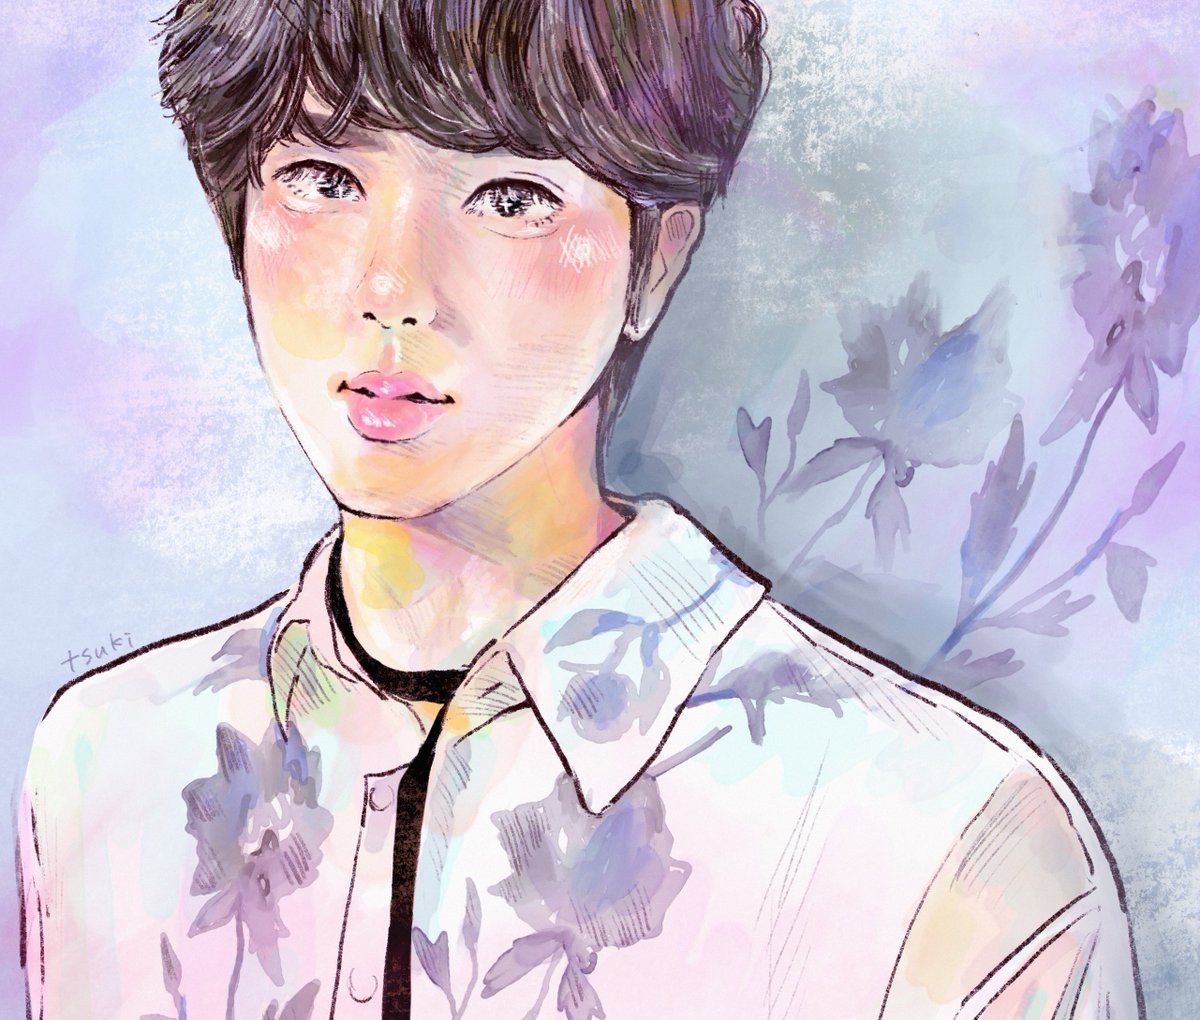 「🥀
#jin 」|𝚝𝚜𝚞𝚔𝚒🌼𝚜𝚕𝚘𝚠のイラスト